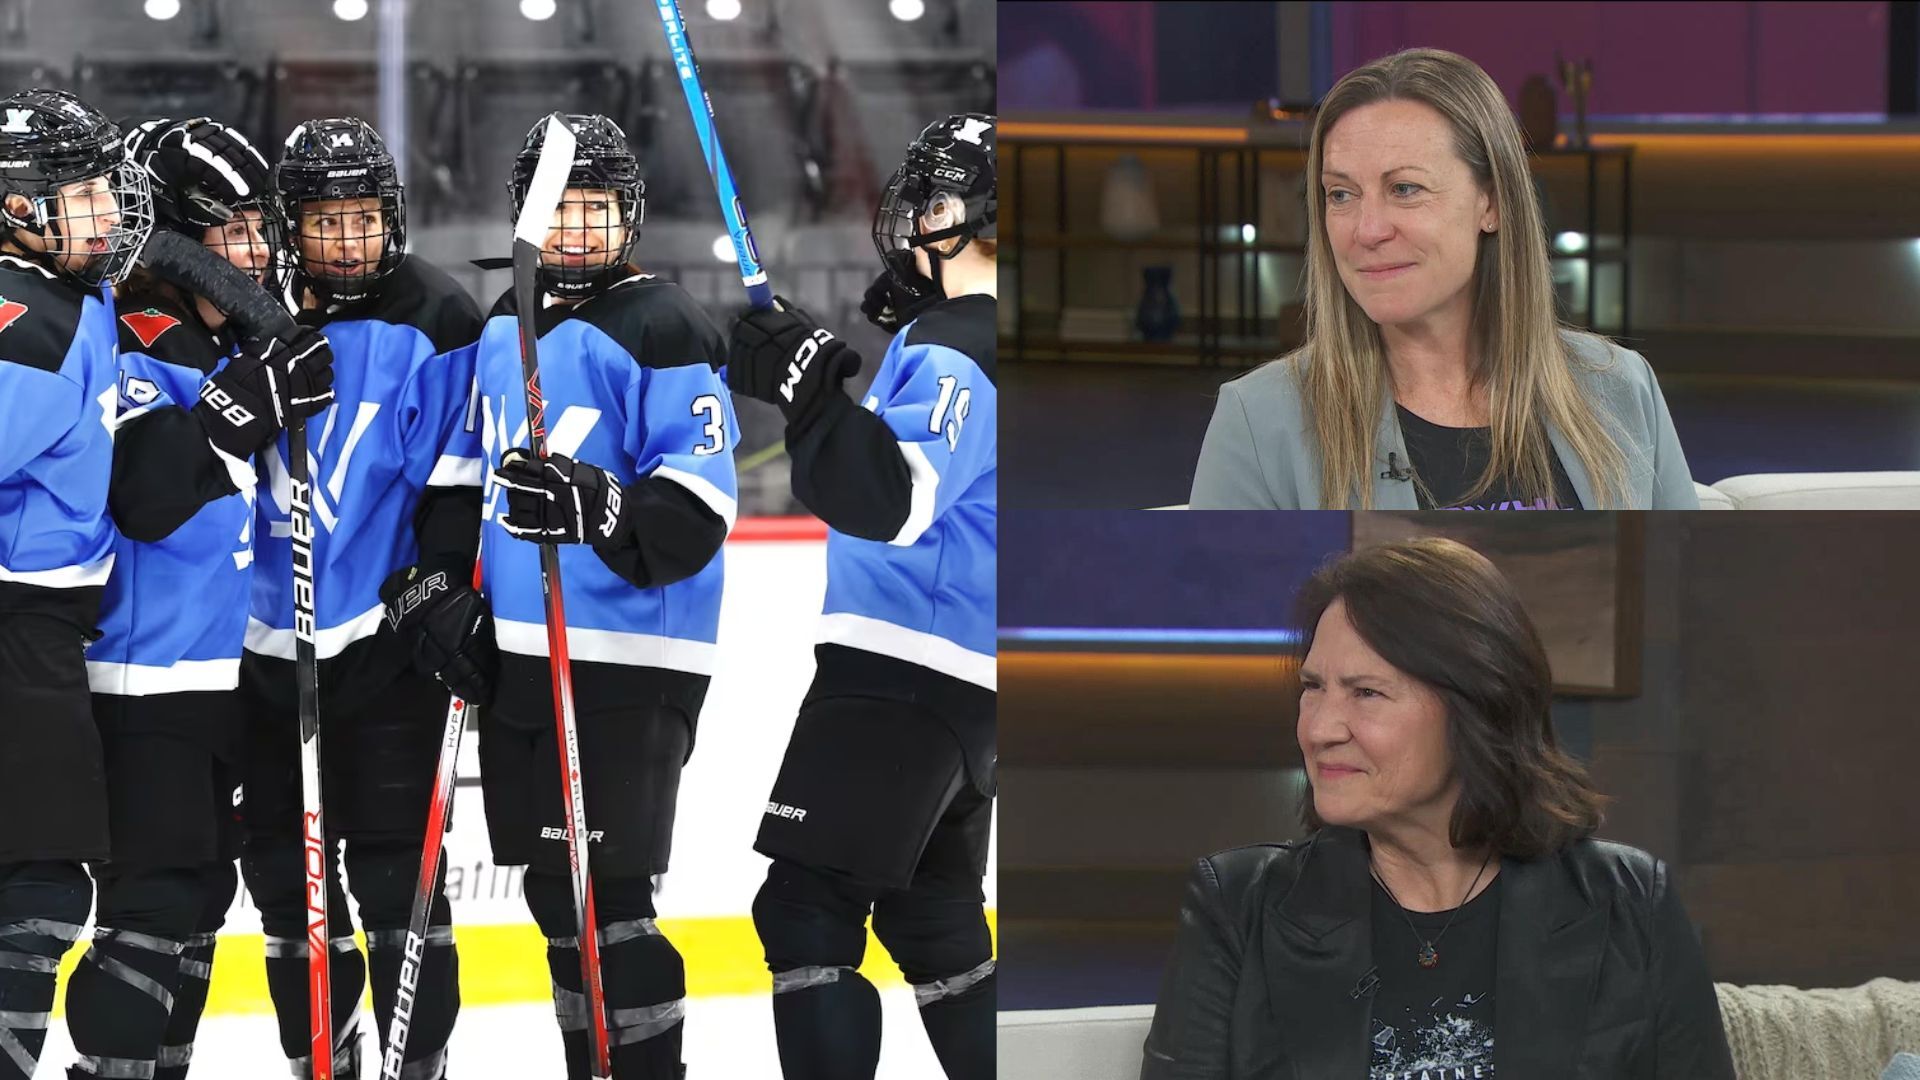 A special new partnership is coming to the PWHL — and we can't wait for it